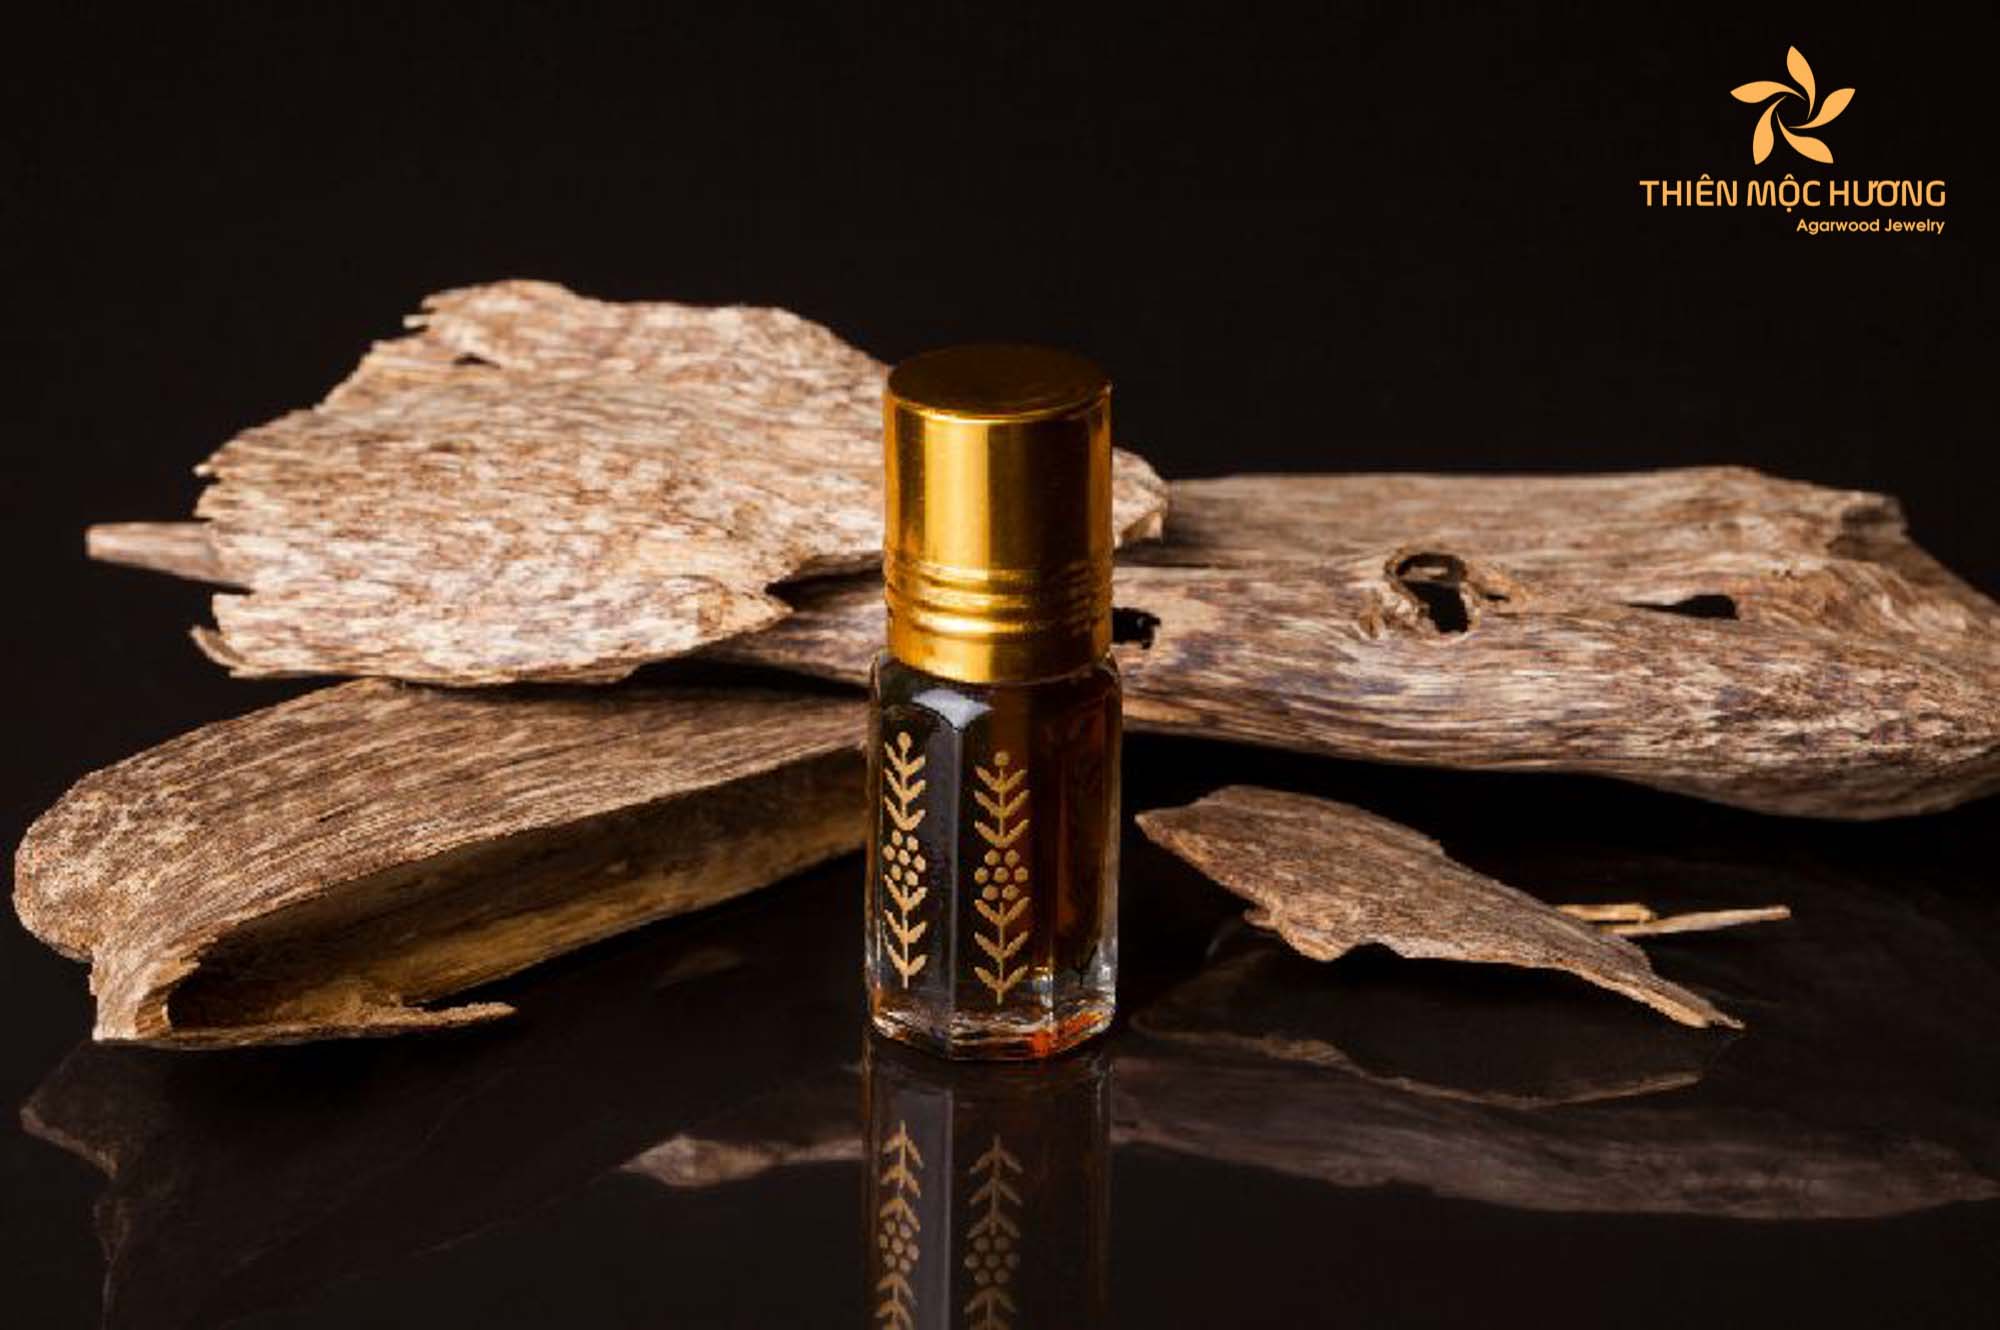 While agarwood offers many benefits, it's essential to be aware of precautions and considerations